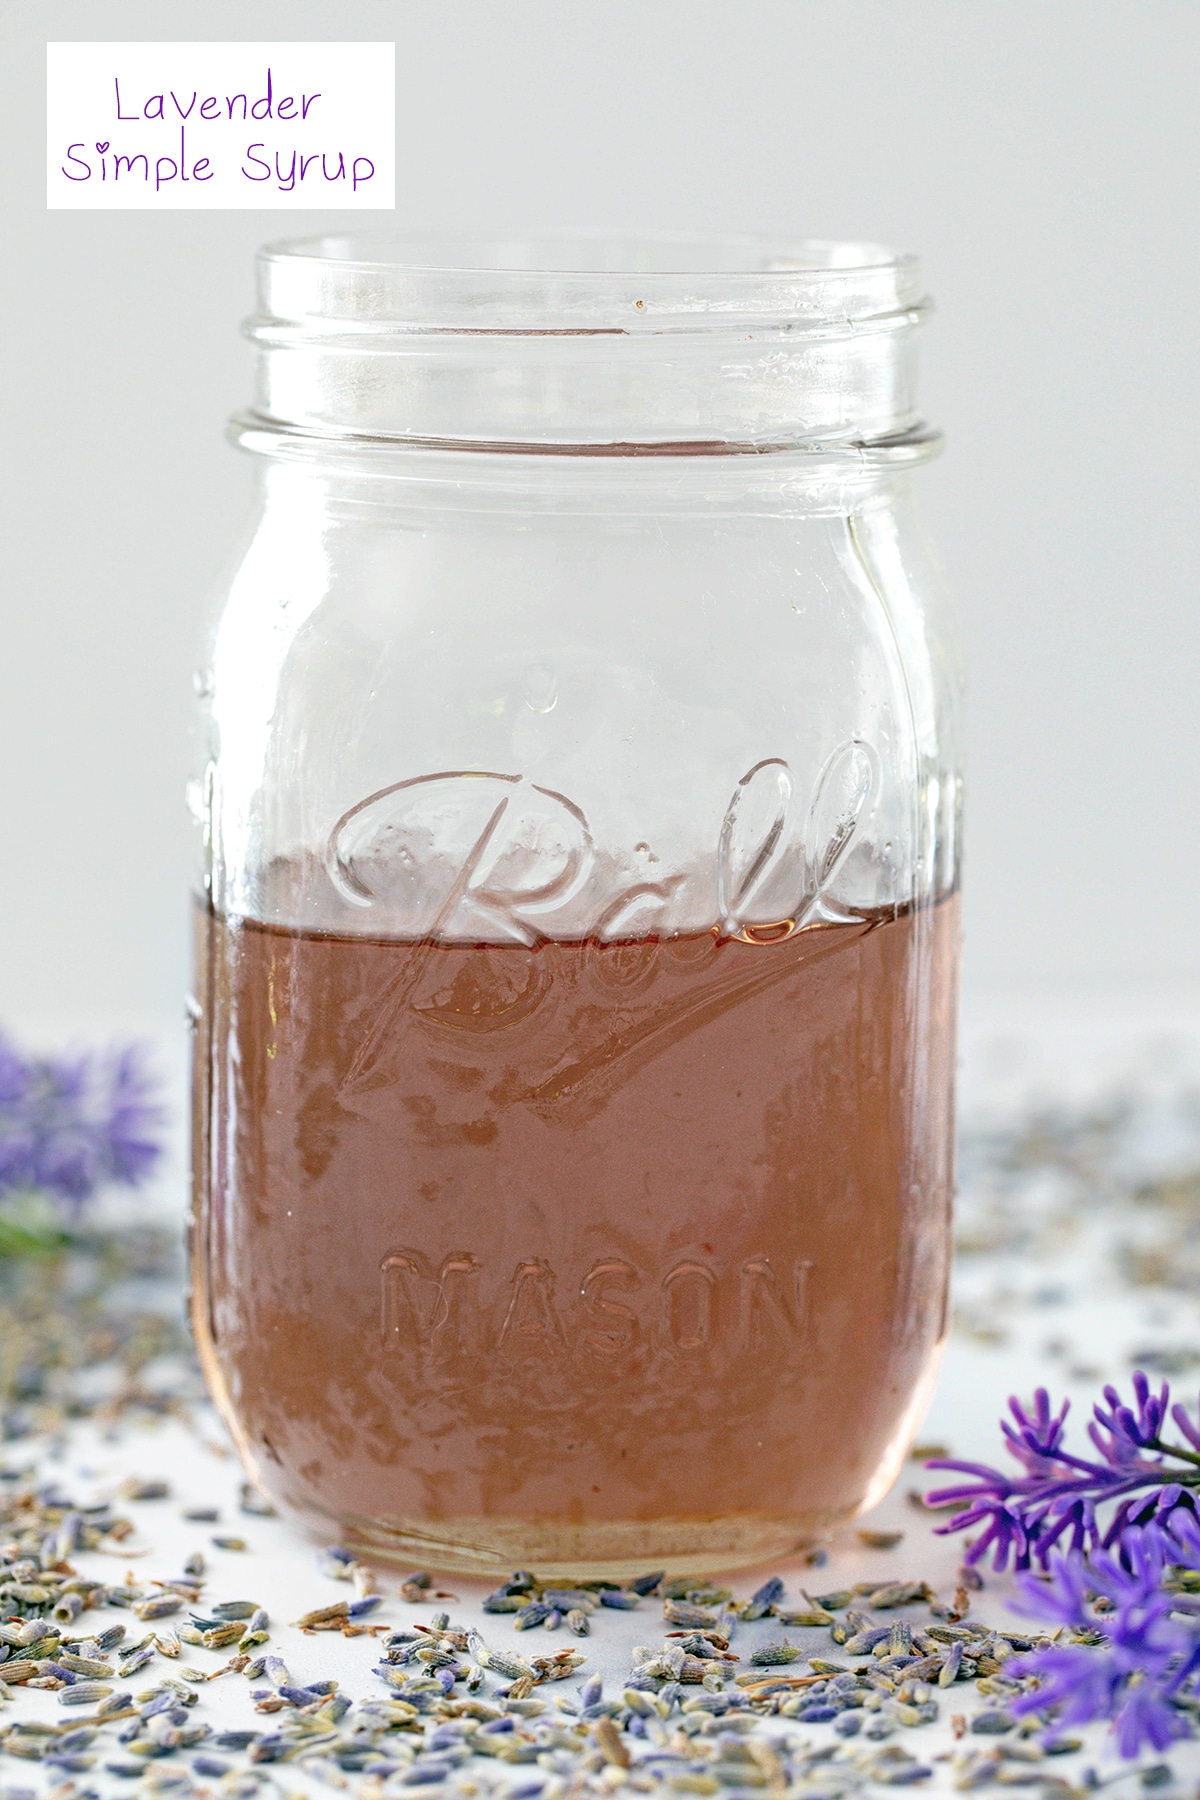 Lavender Simple Syrup Recipe | We are not Martha